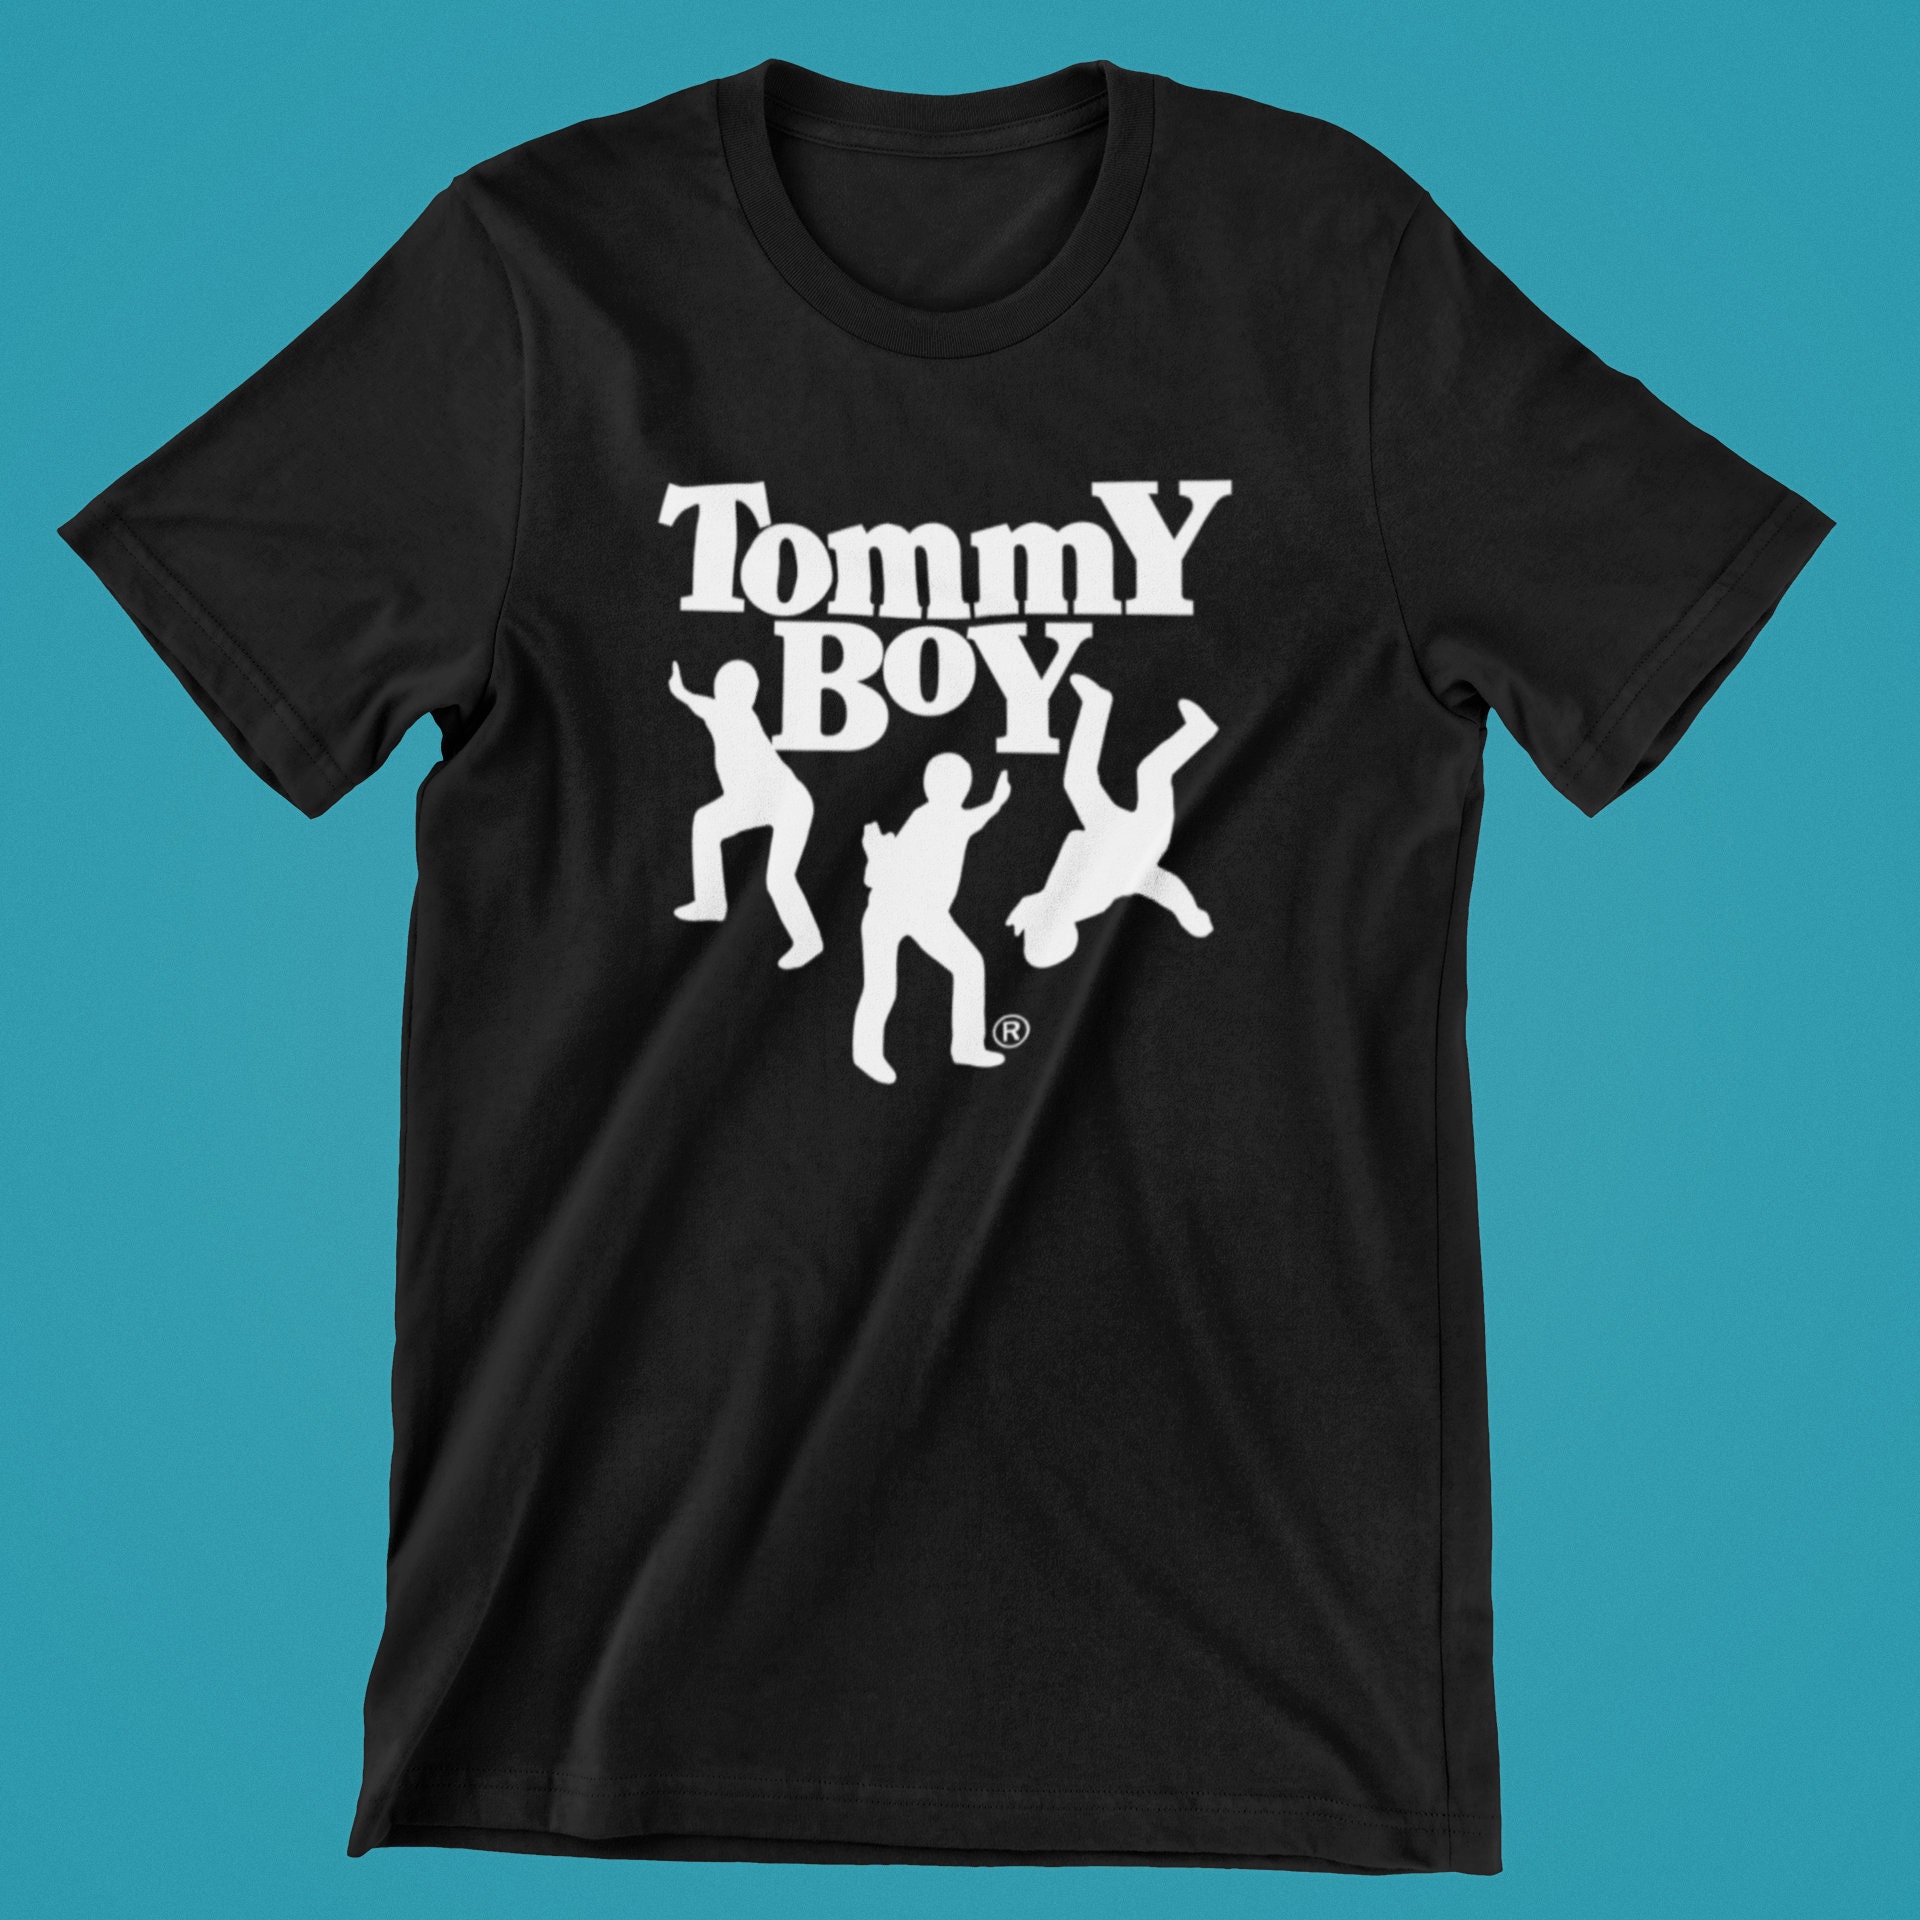 Discover Tommy Boy Retro Hip Hop Style T-Shirt